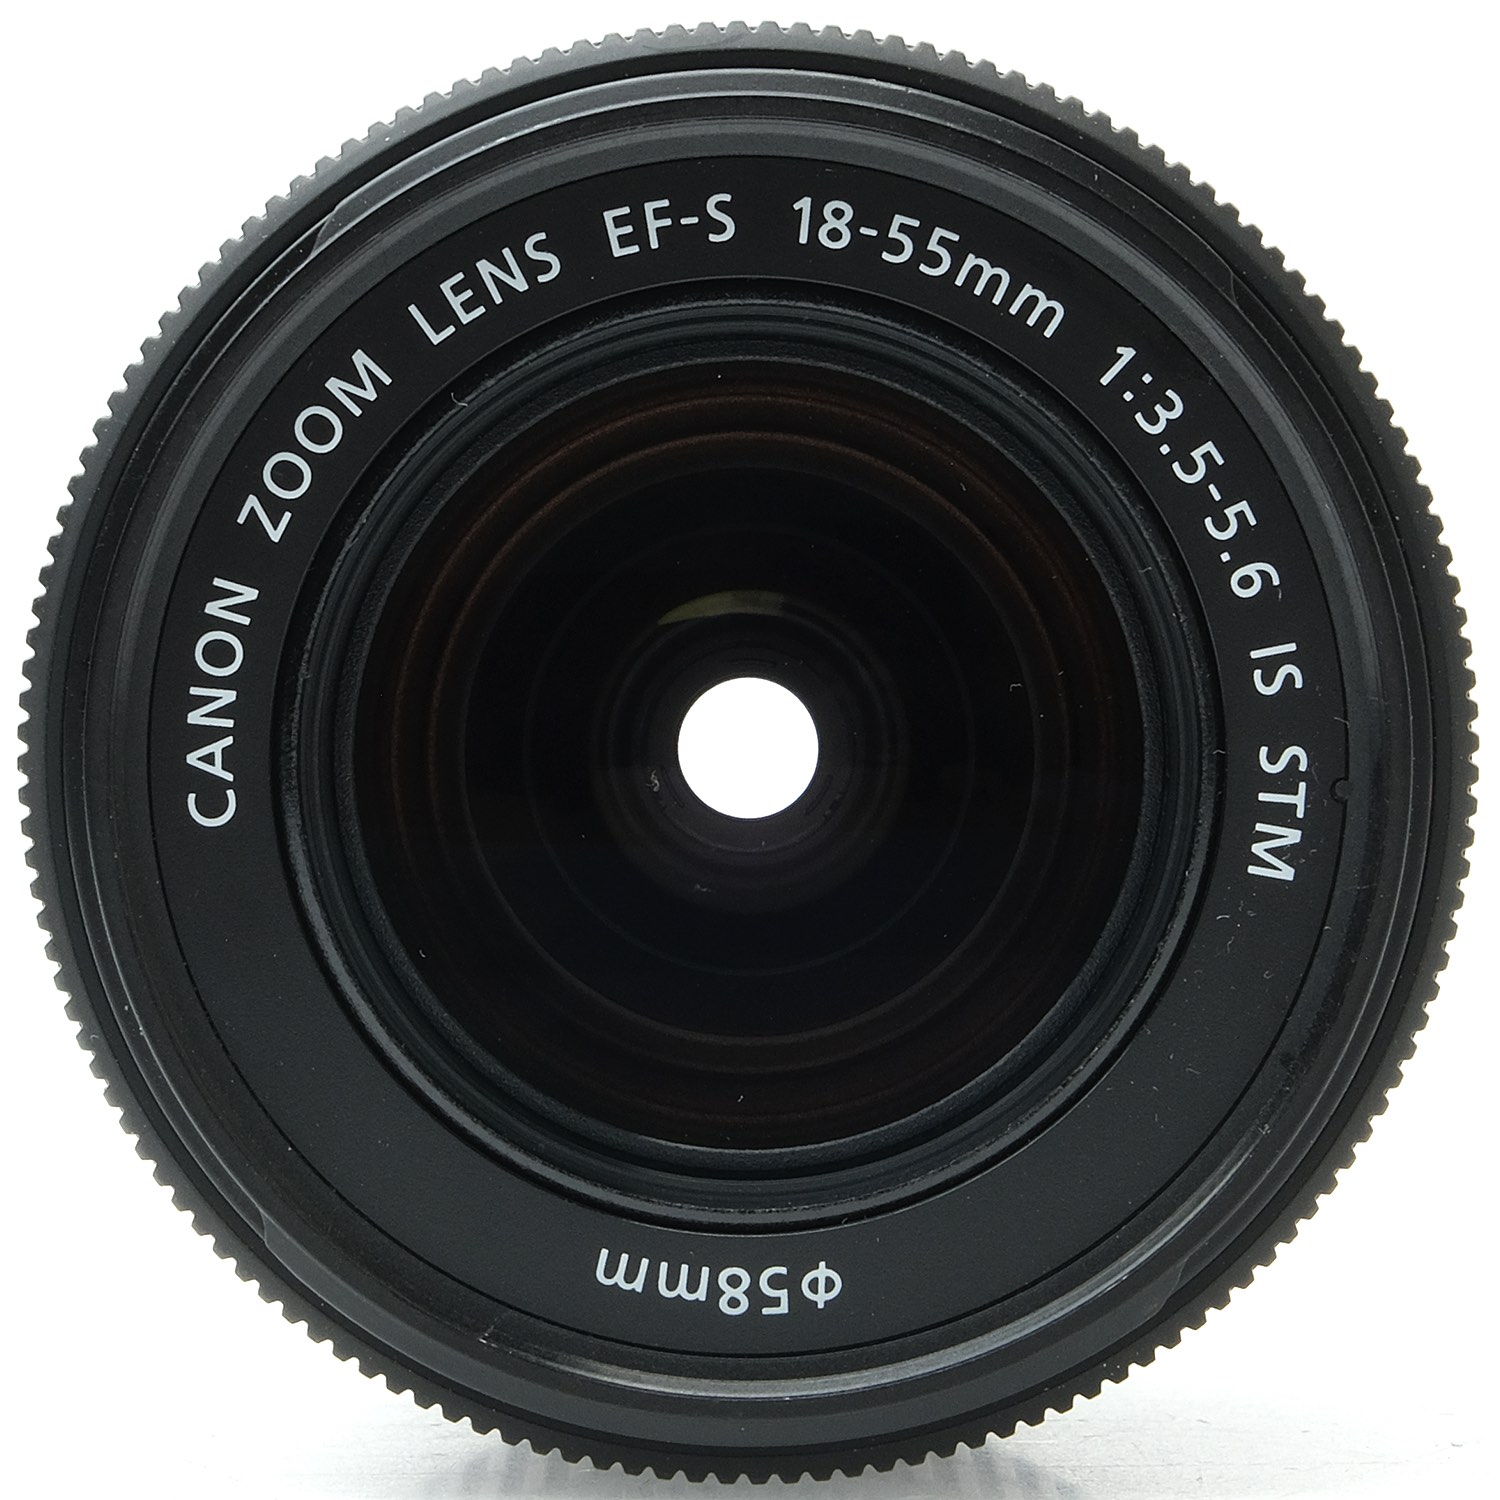 Canon 18-55mm f3.5-5.6 IS STM 325204082905